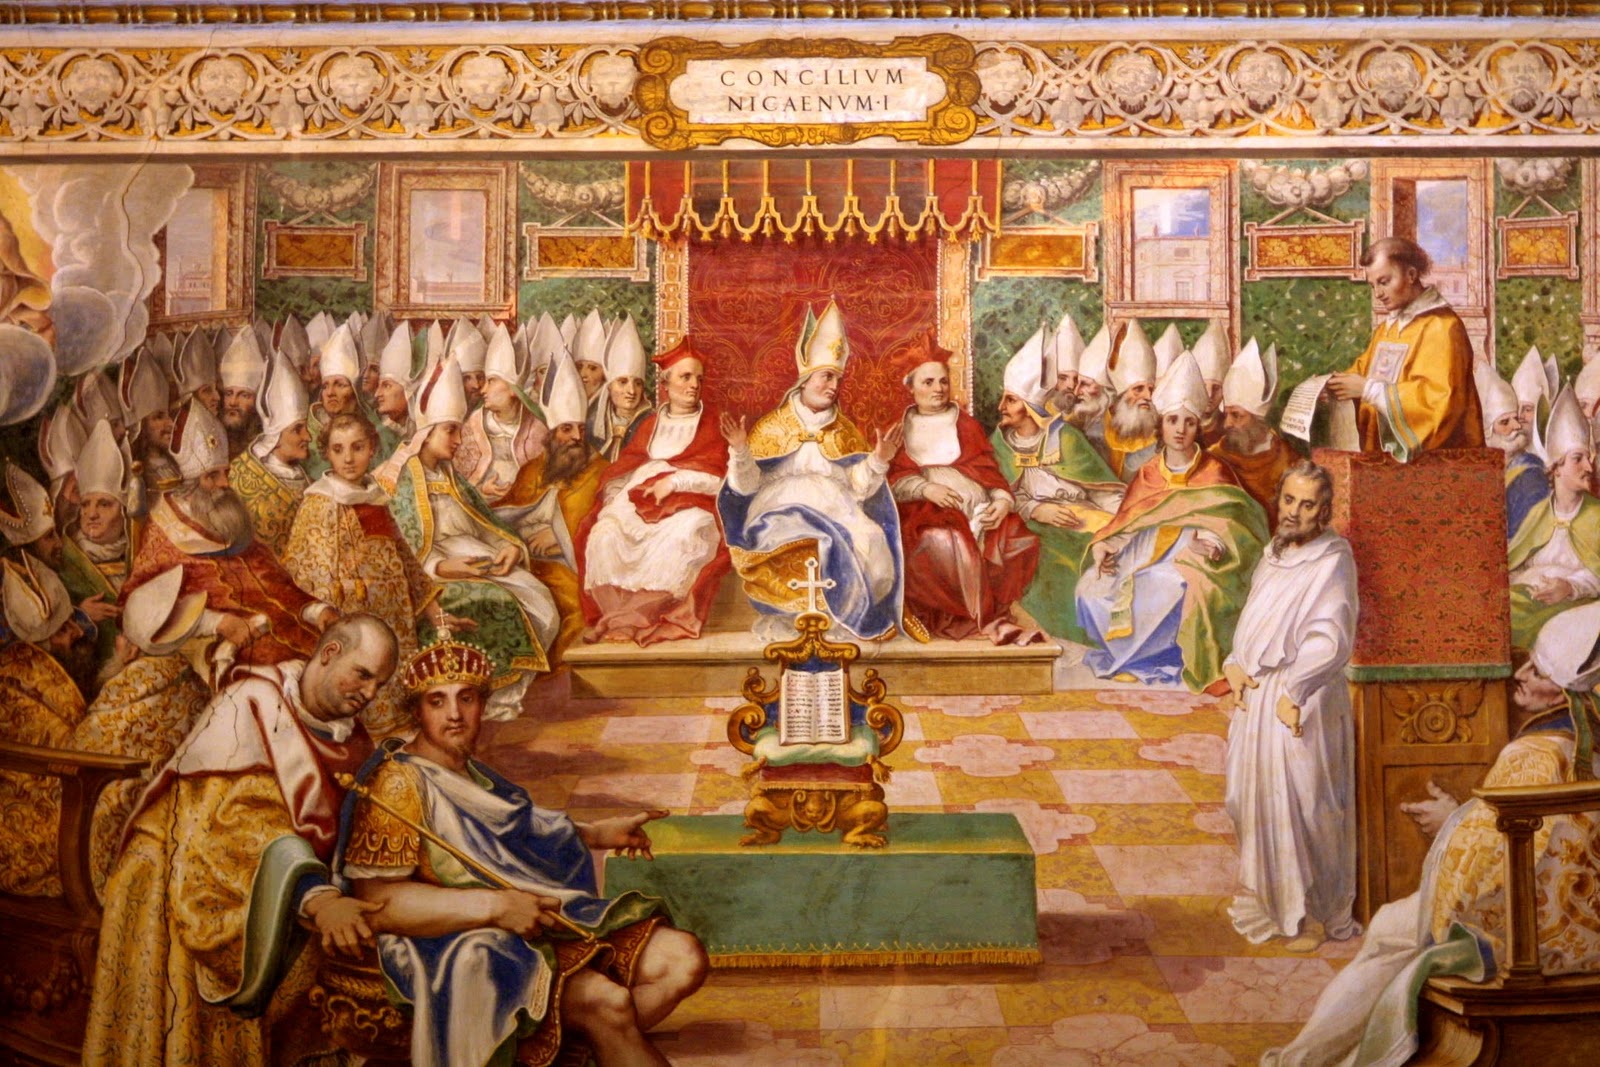 Council of Nicea, 325 AD